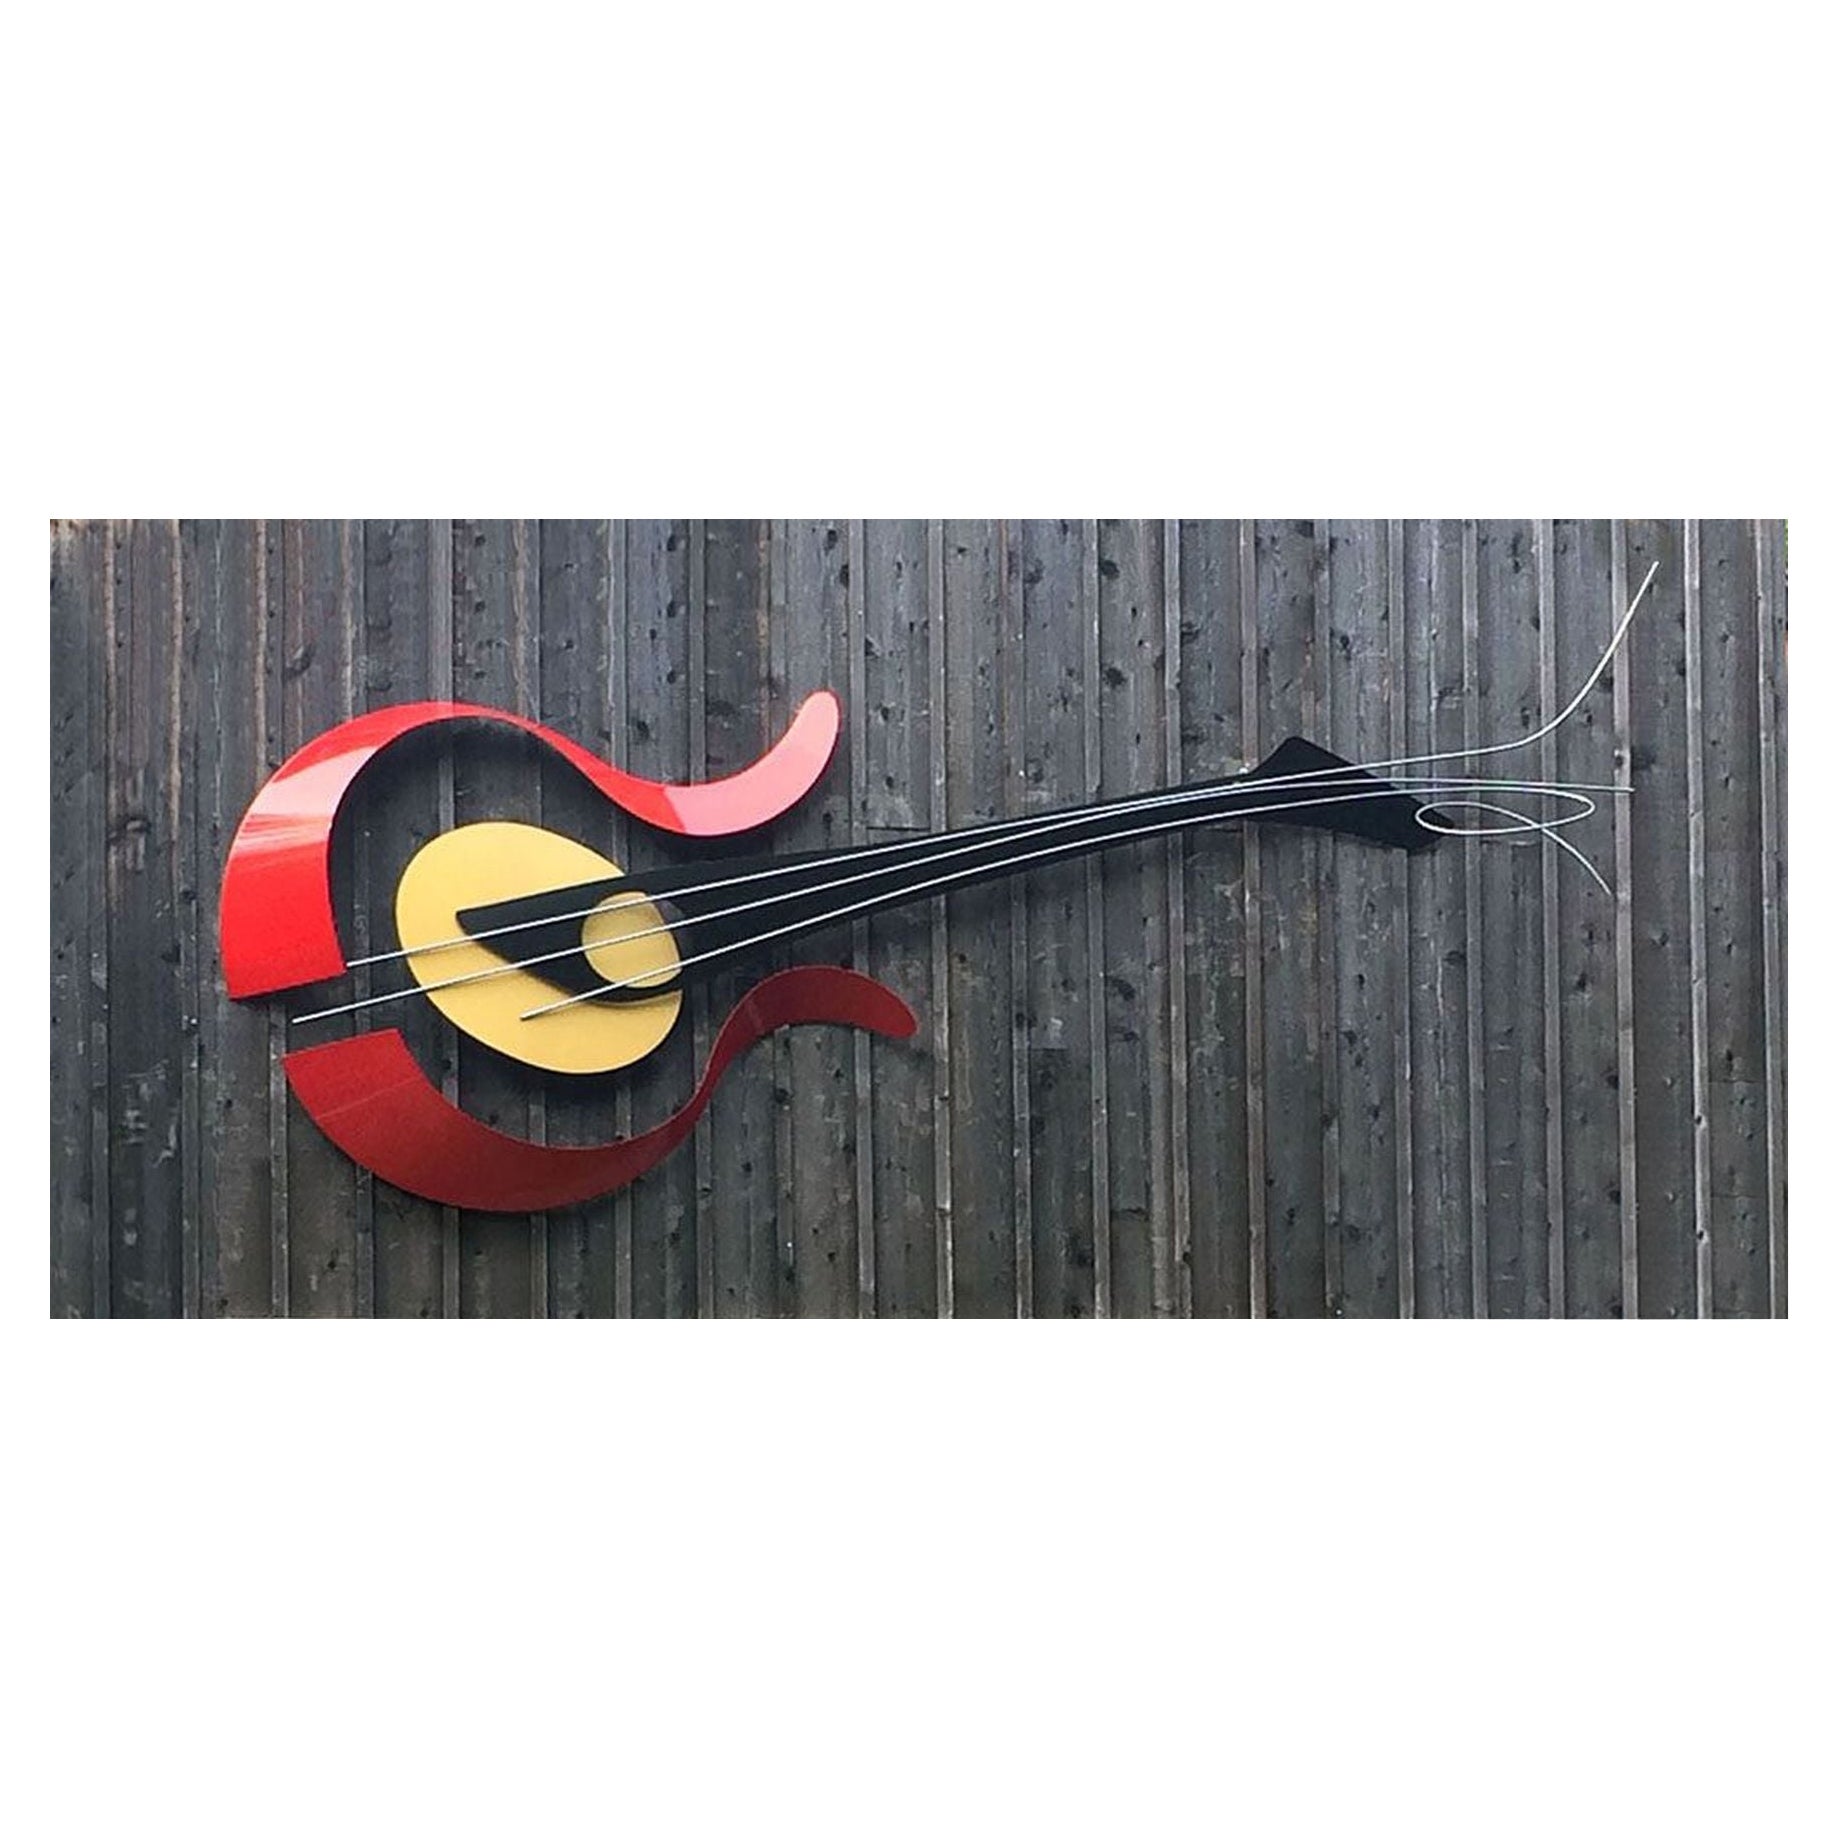 One of a Kind 1st Love Red Guitar Powder Coated Steel For Sale